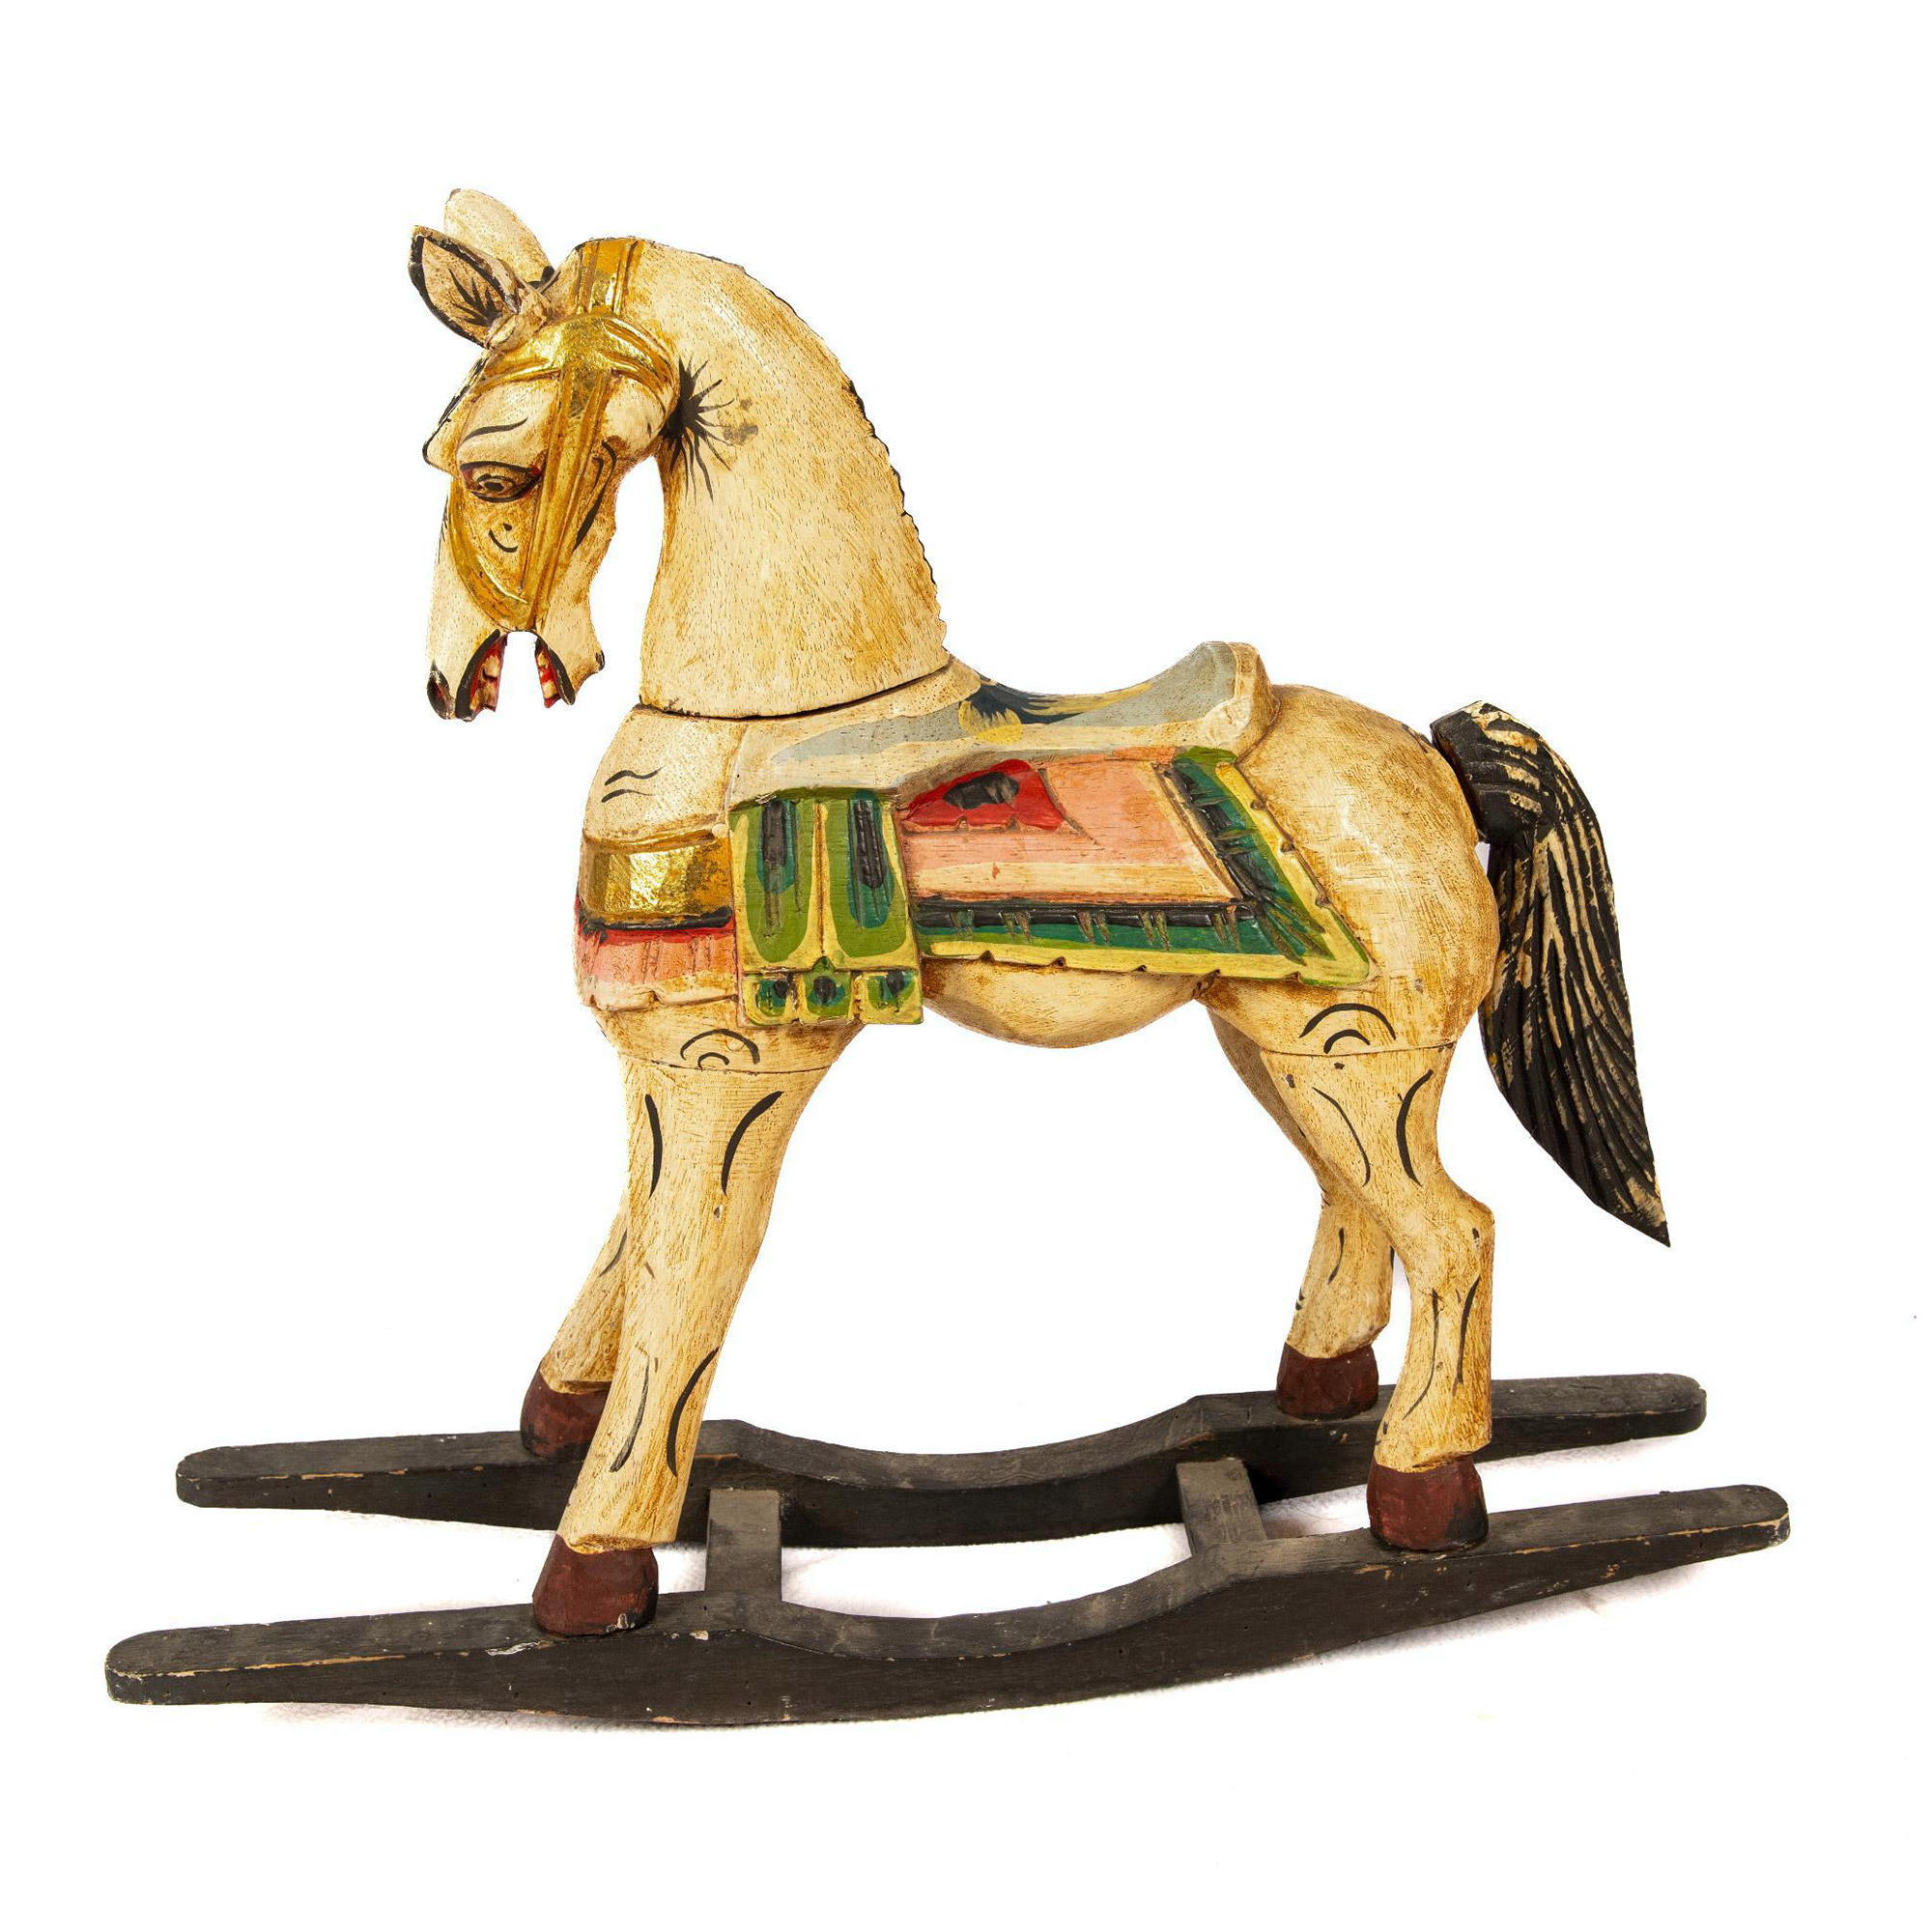 Small Decorative Wooden Carousel Rocking Horse - Image 2 of 6